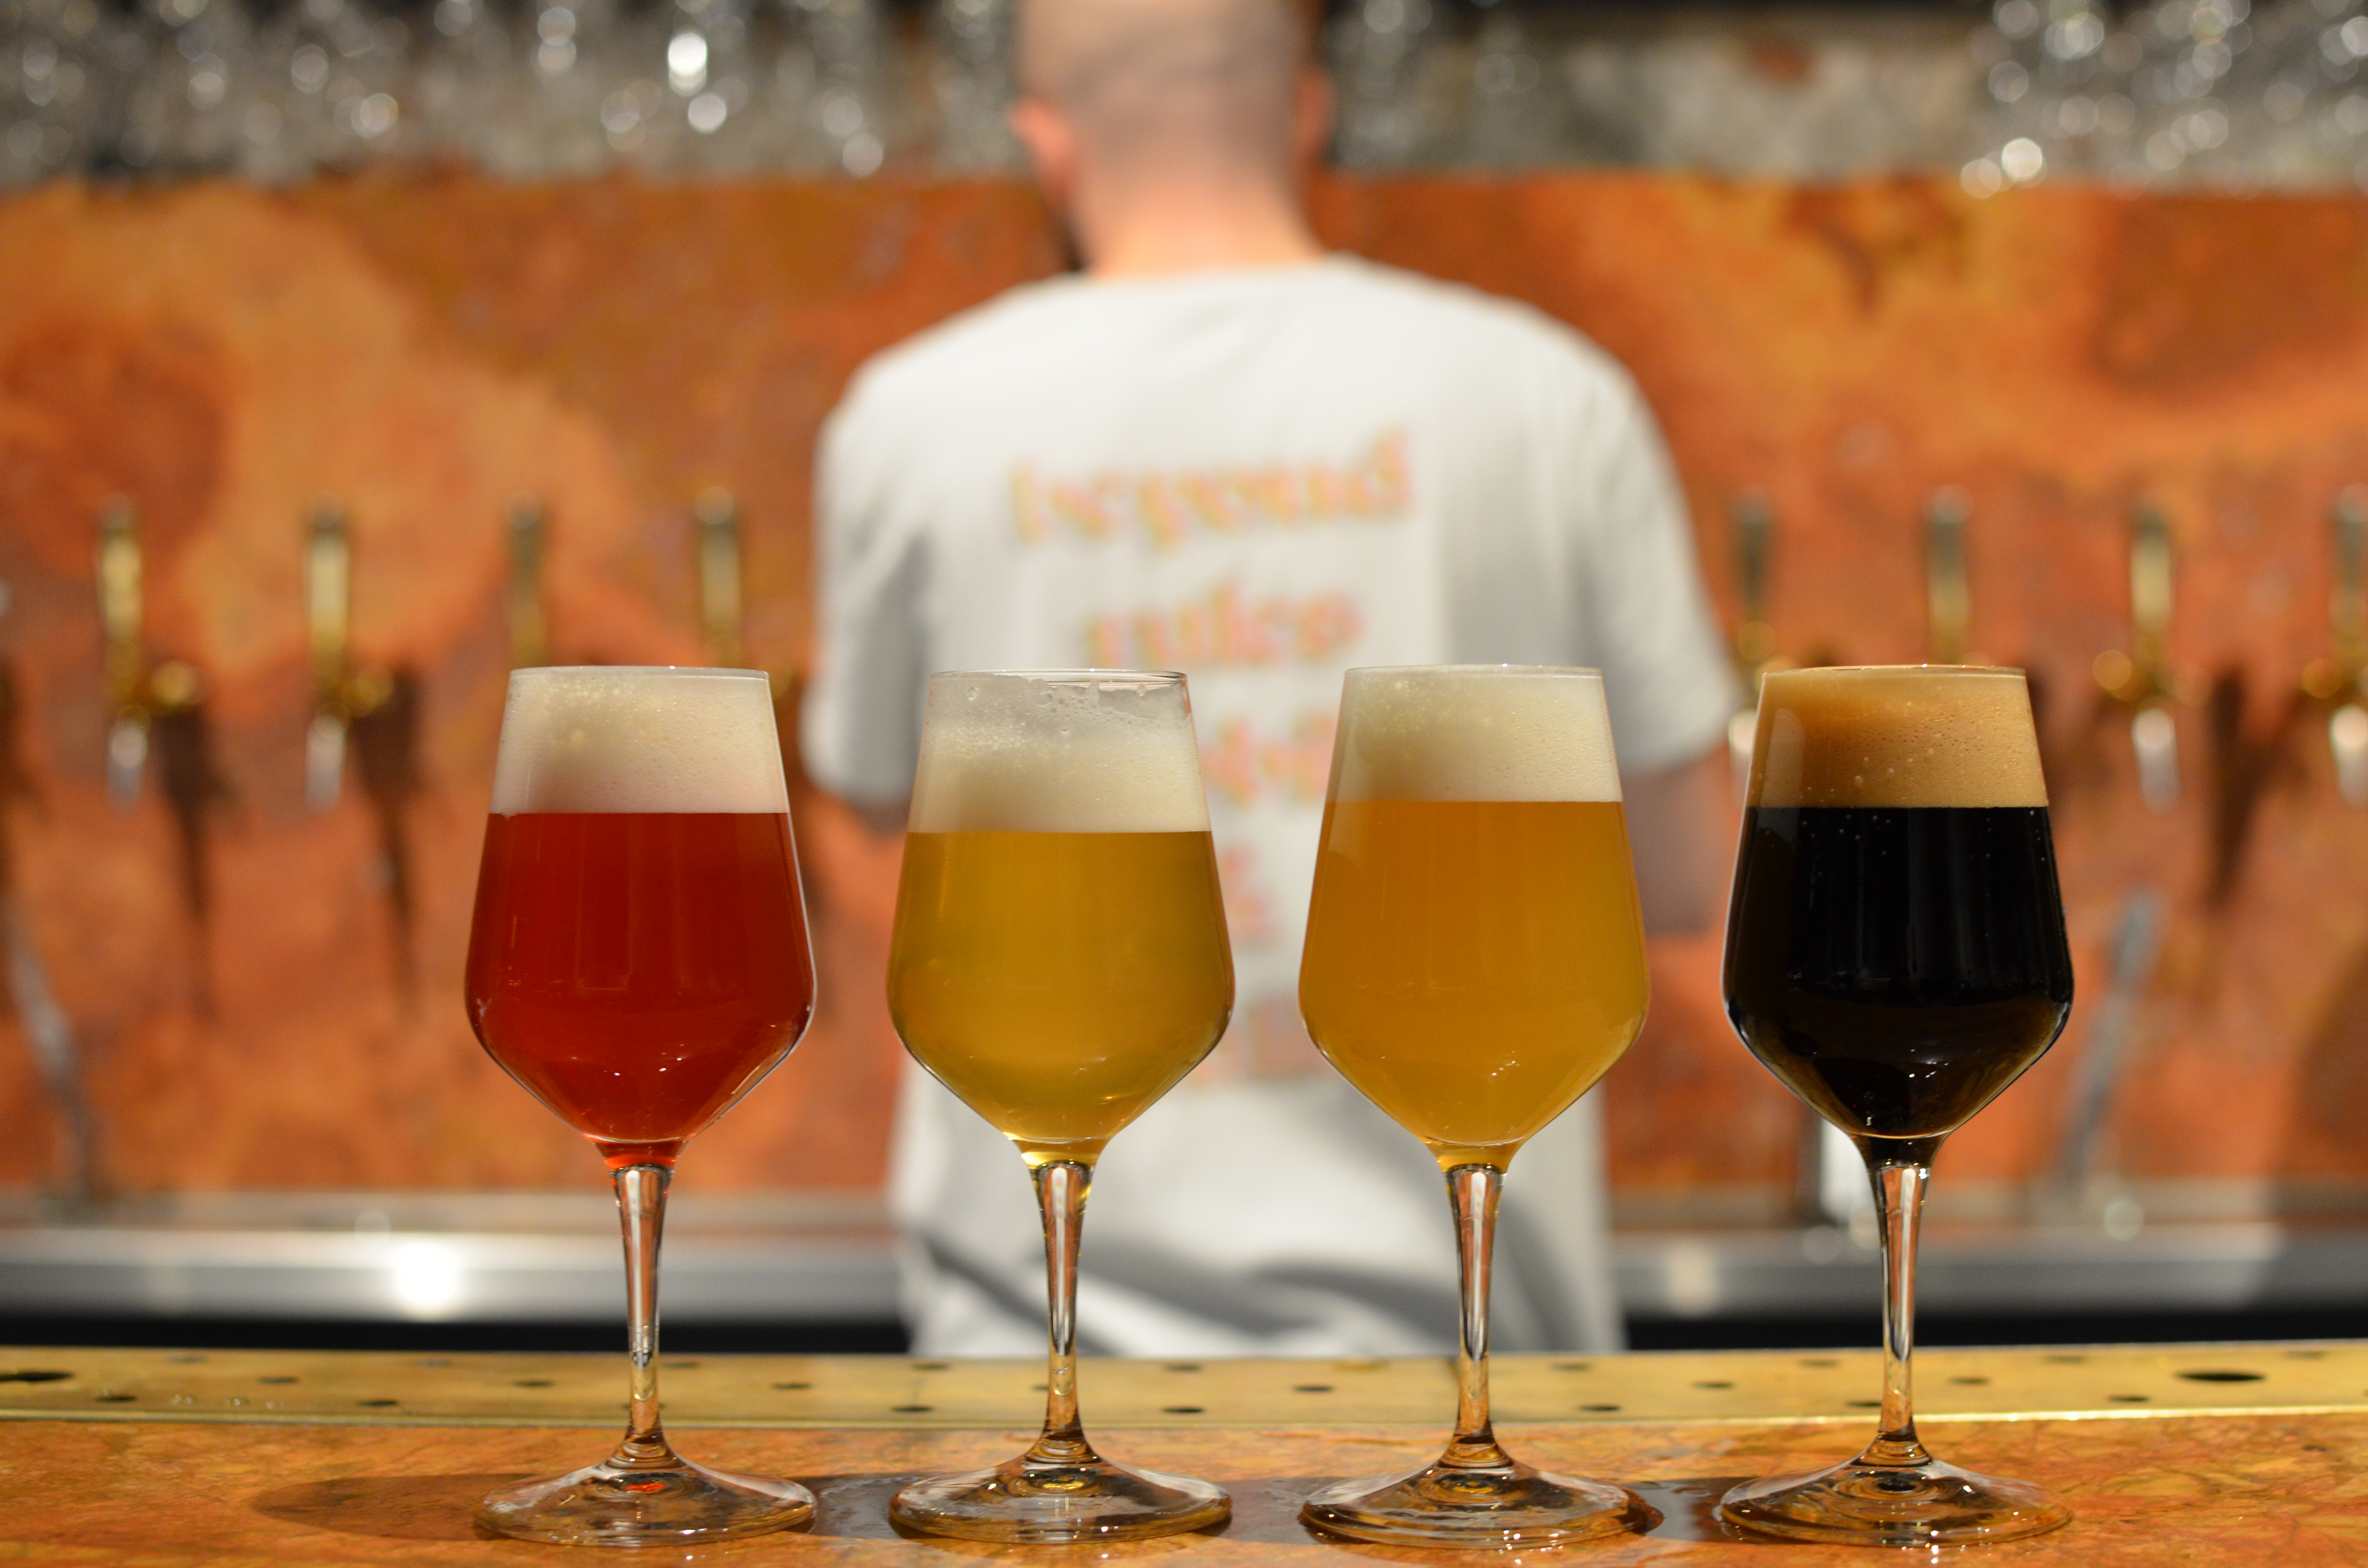 Visit a Brussels brewery